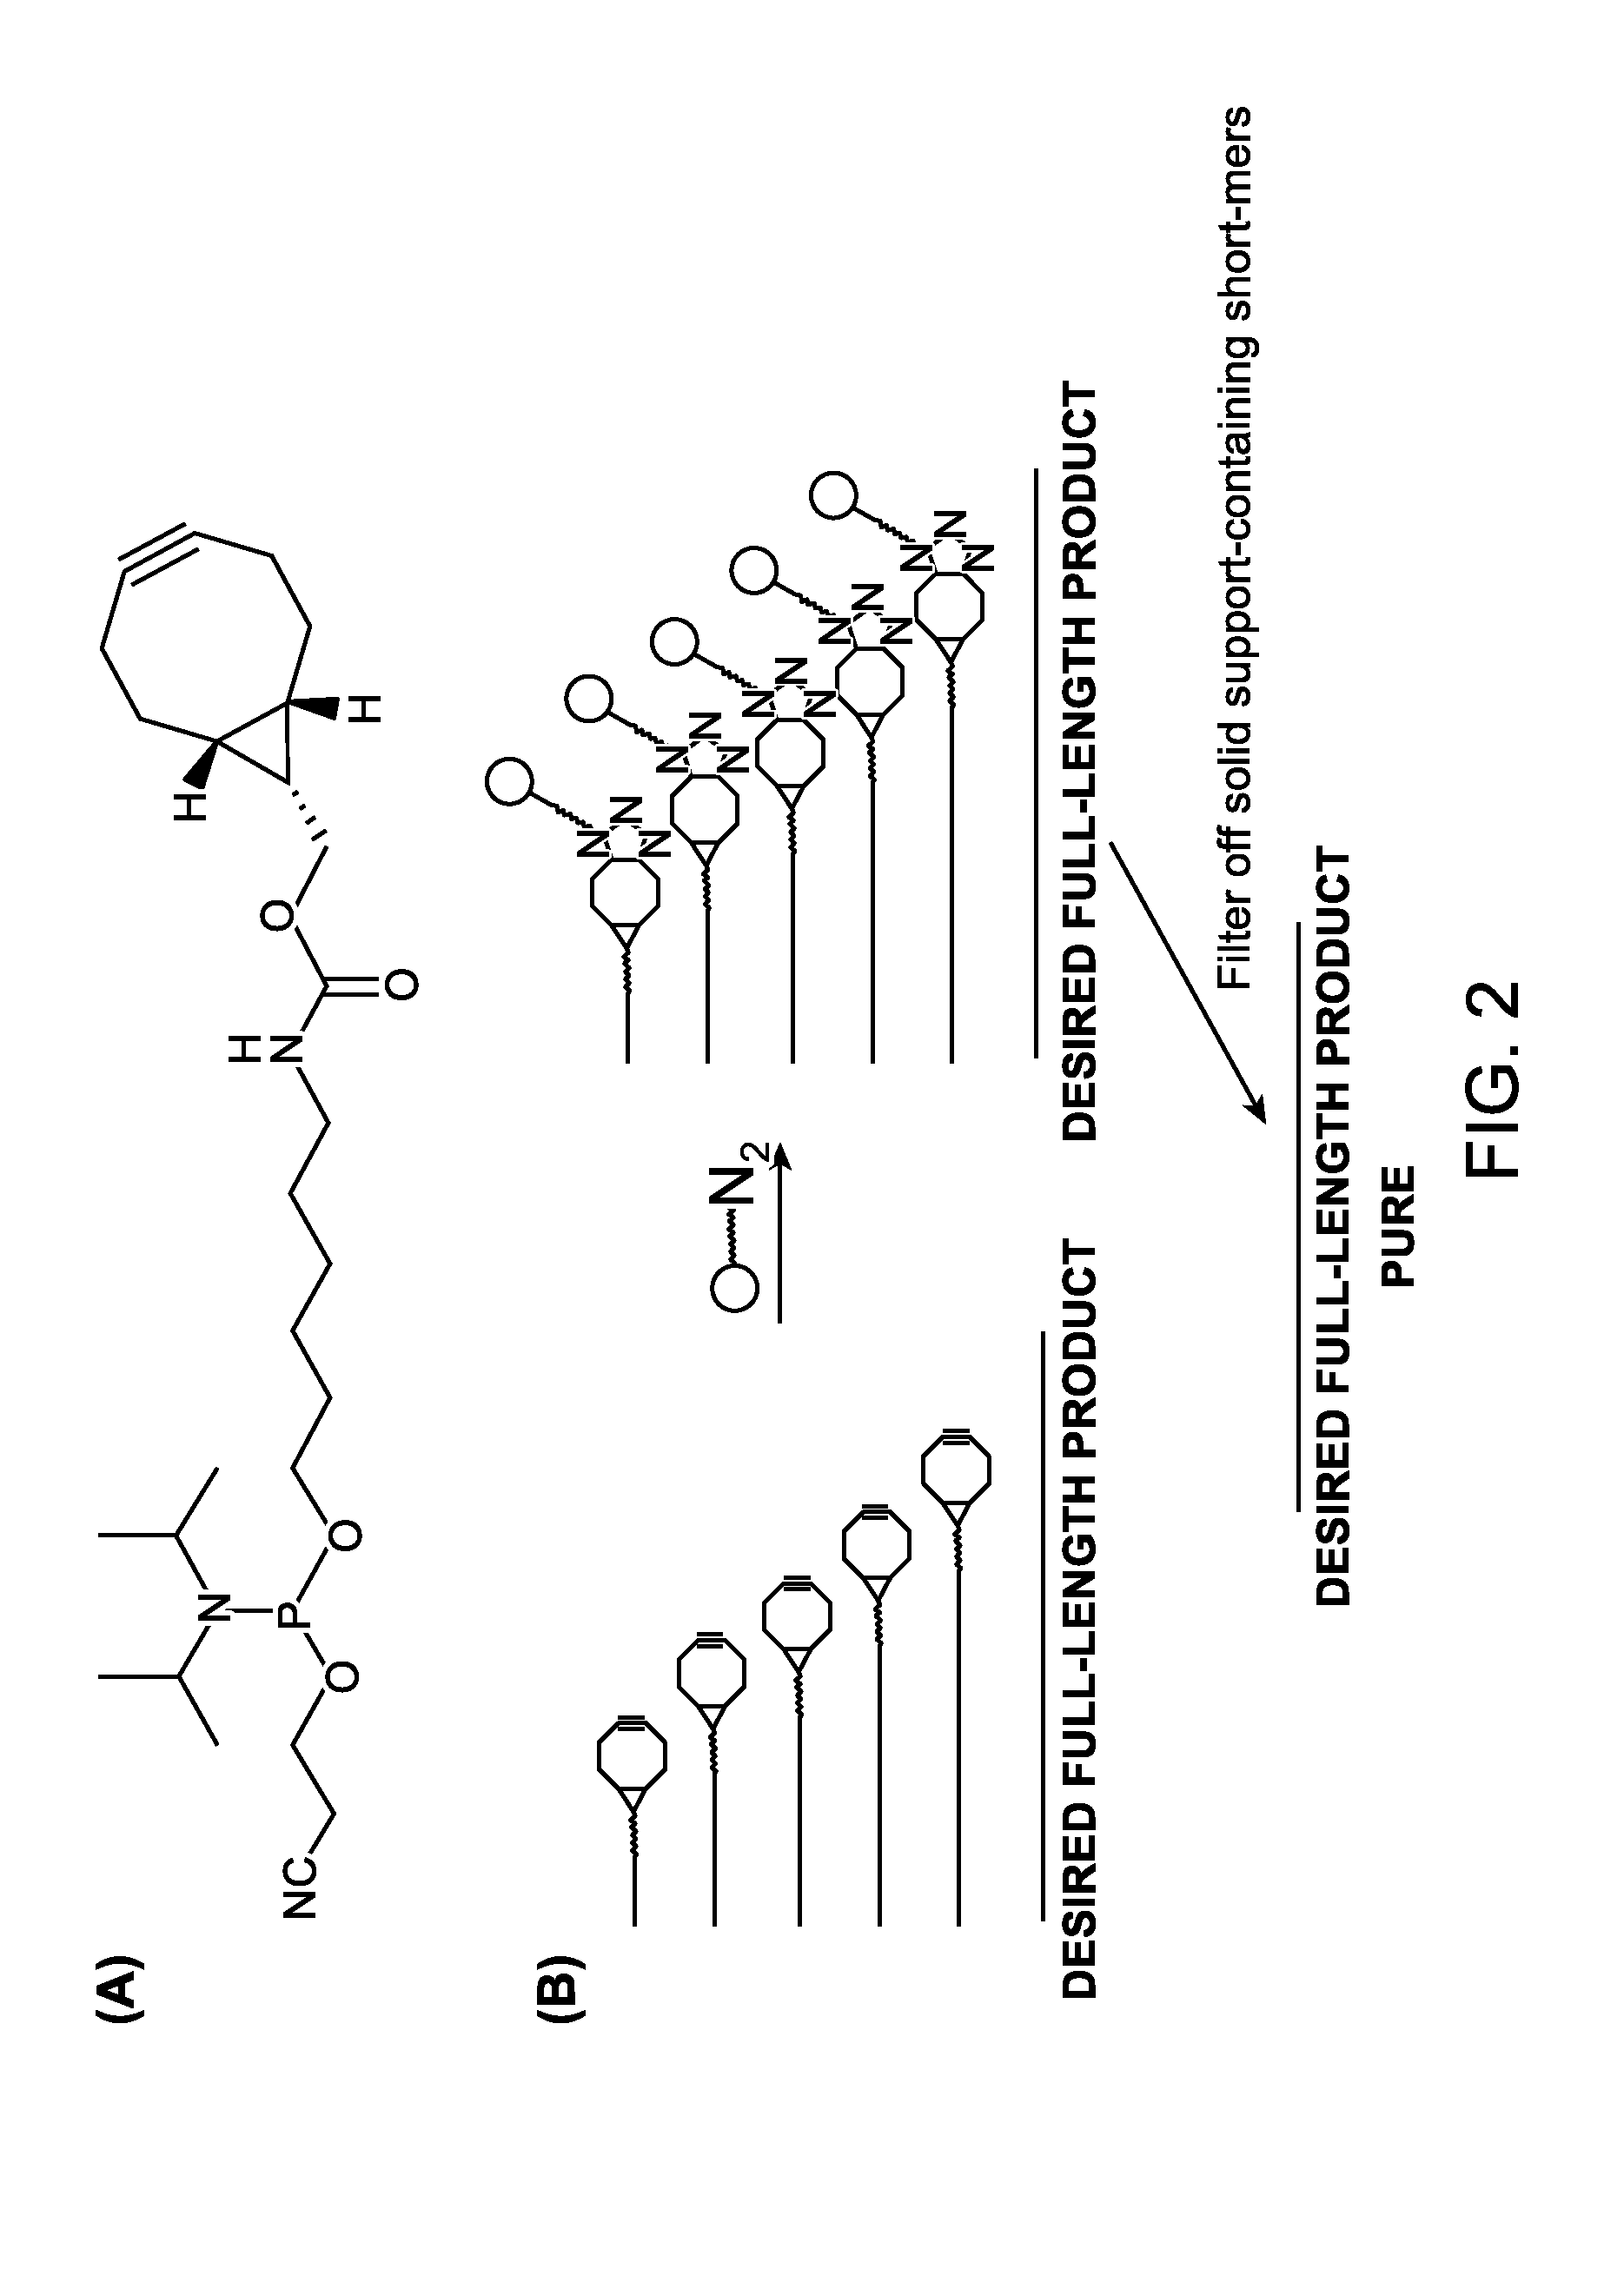 Methods for the synthesis and purification of oligomers